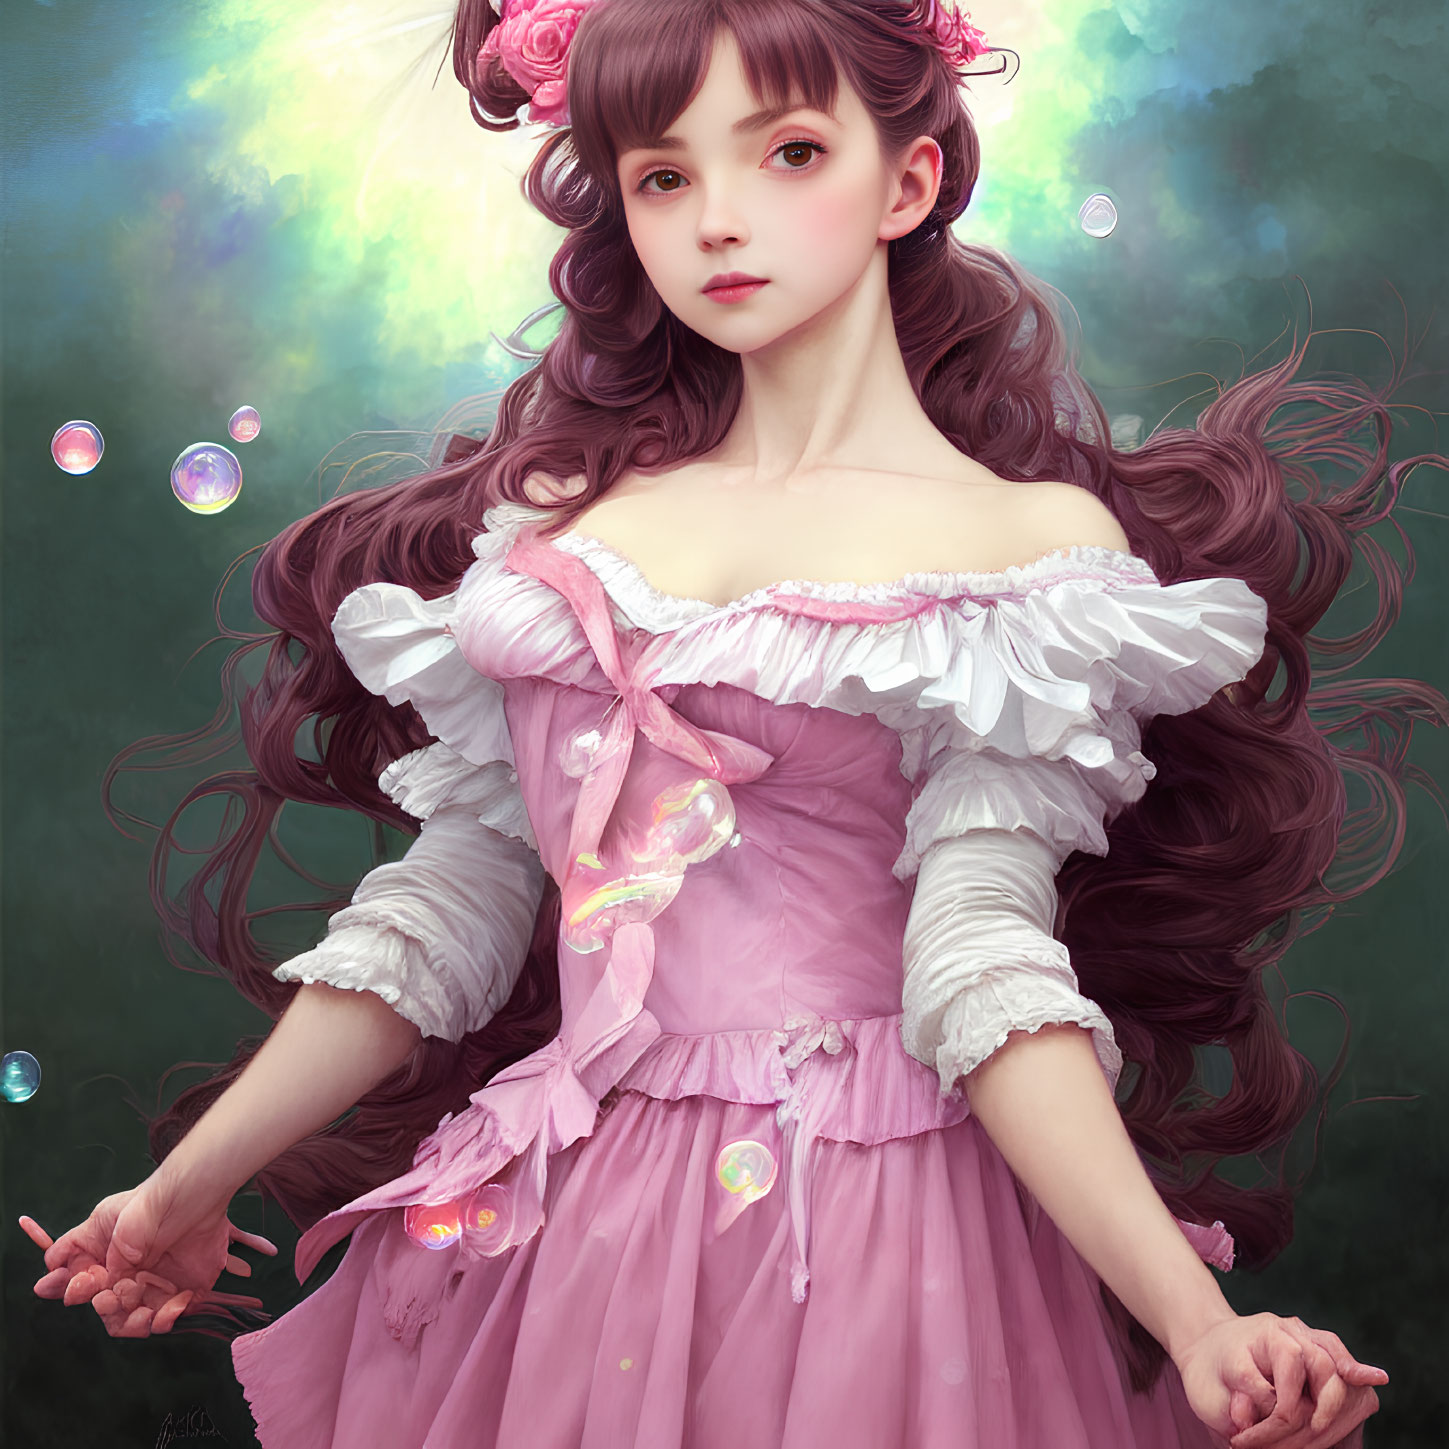 Digital painting of woman with long wavy hair in pink and white dress amid floating bubbles on green backdrop